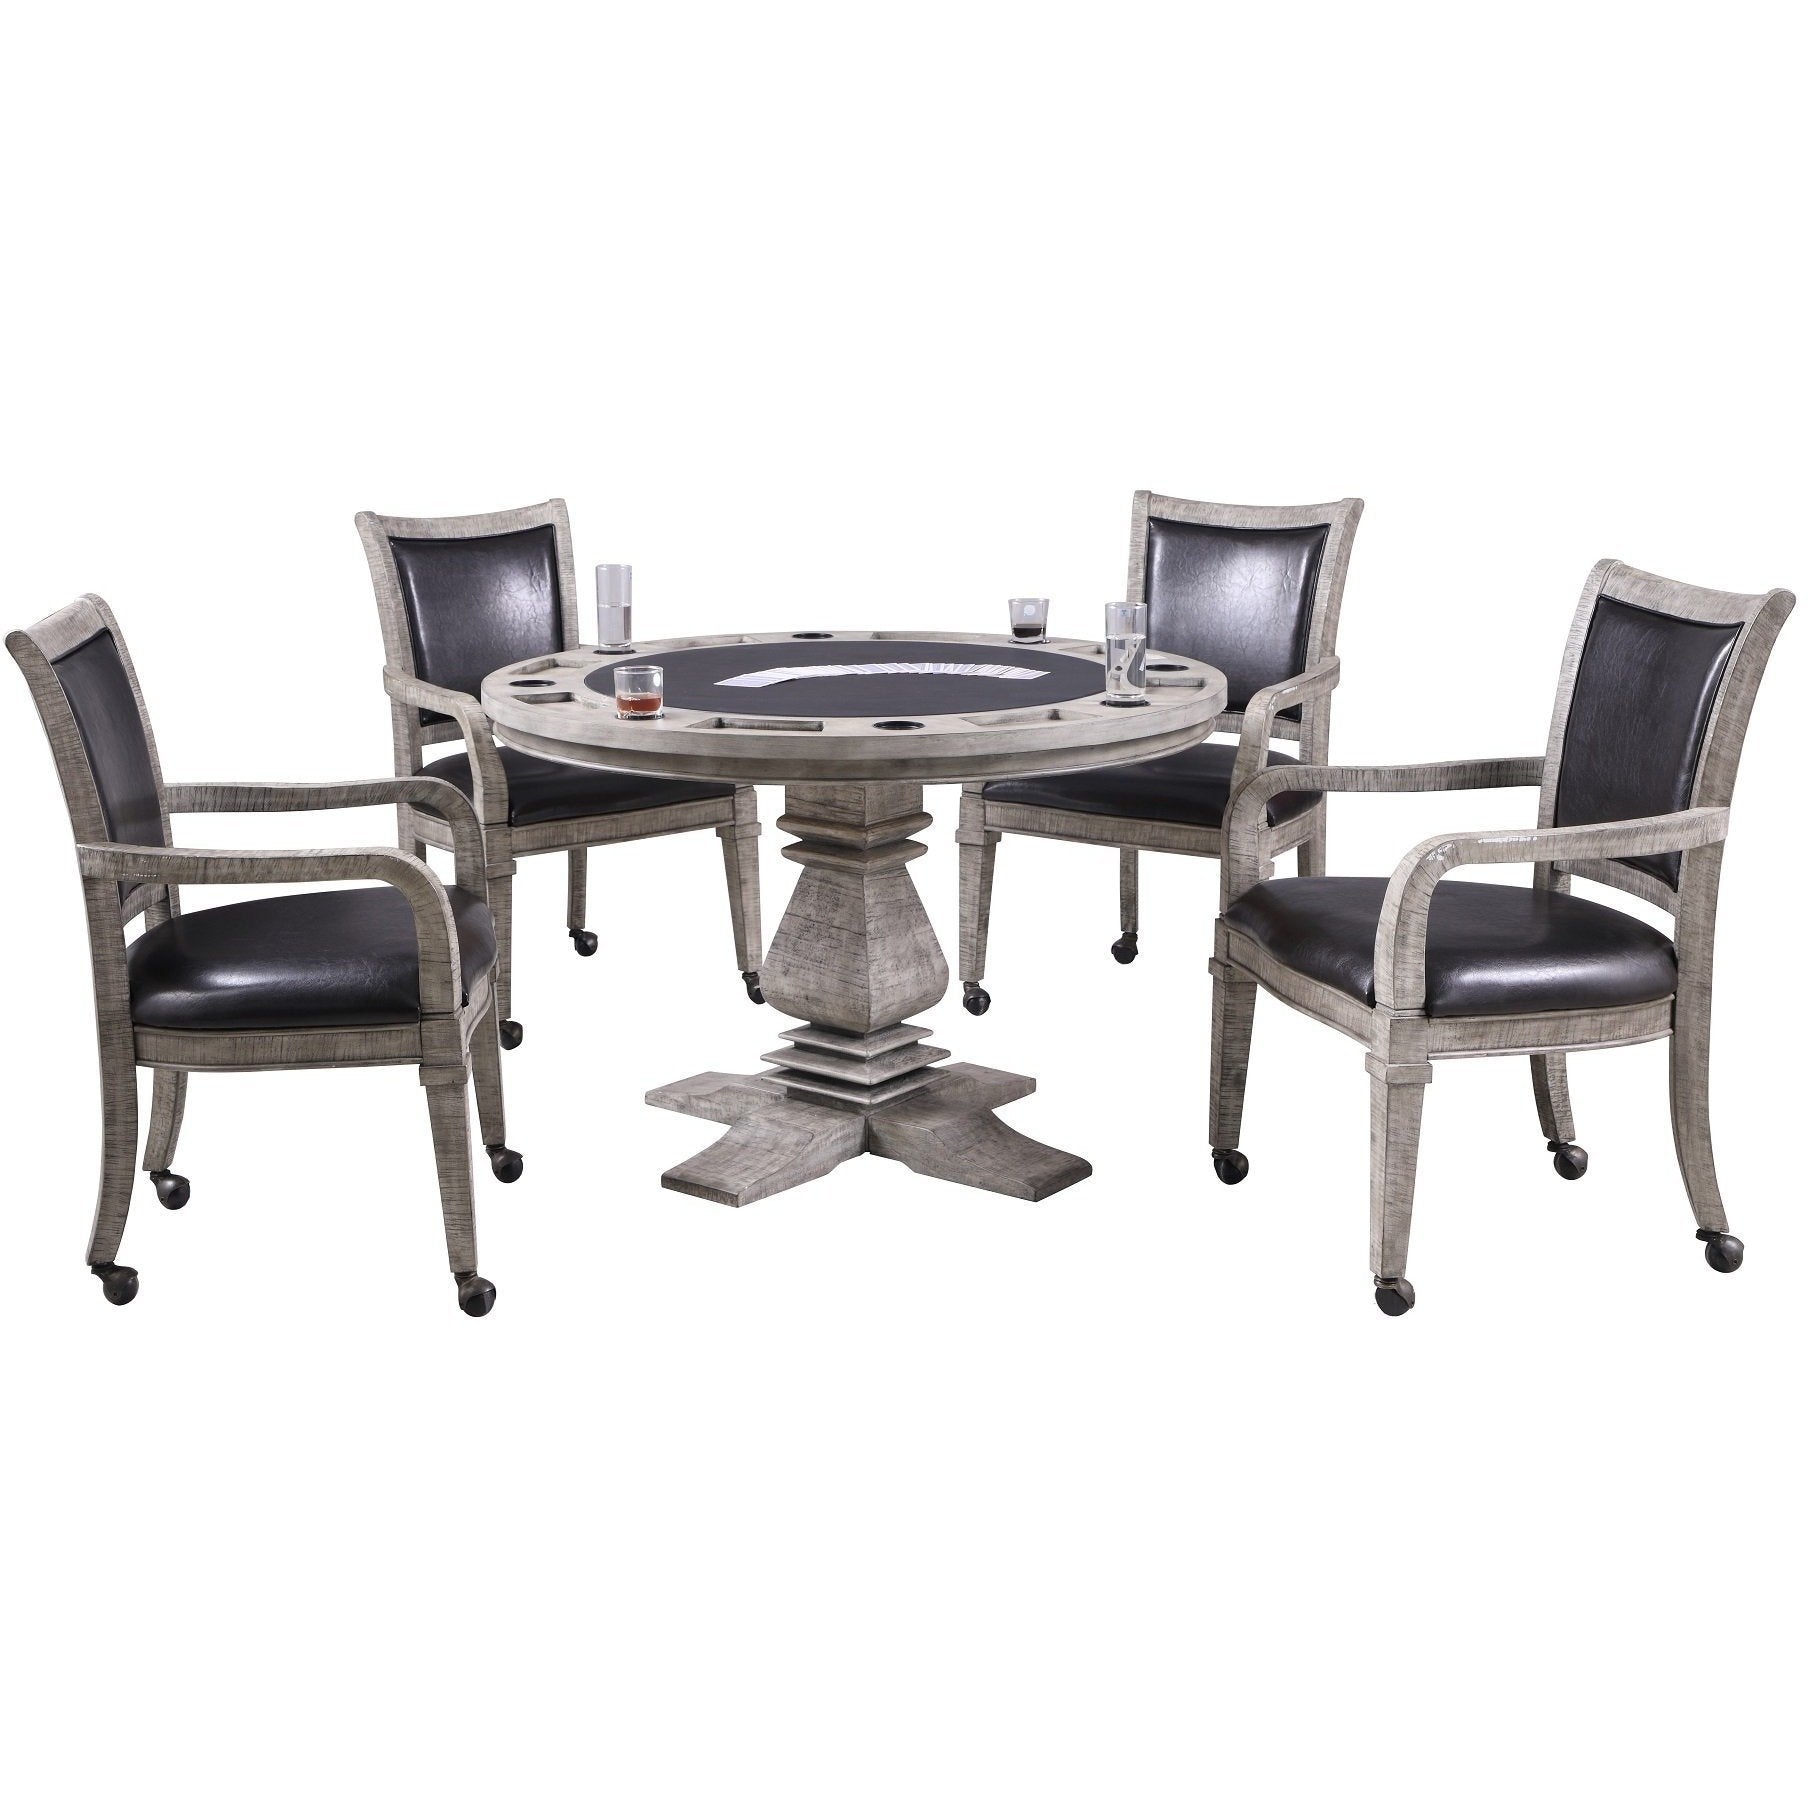 Hathaway Montecito Driftwood 48" Poker Dining Table with 4 Arm Chairs - Just Poker Tables